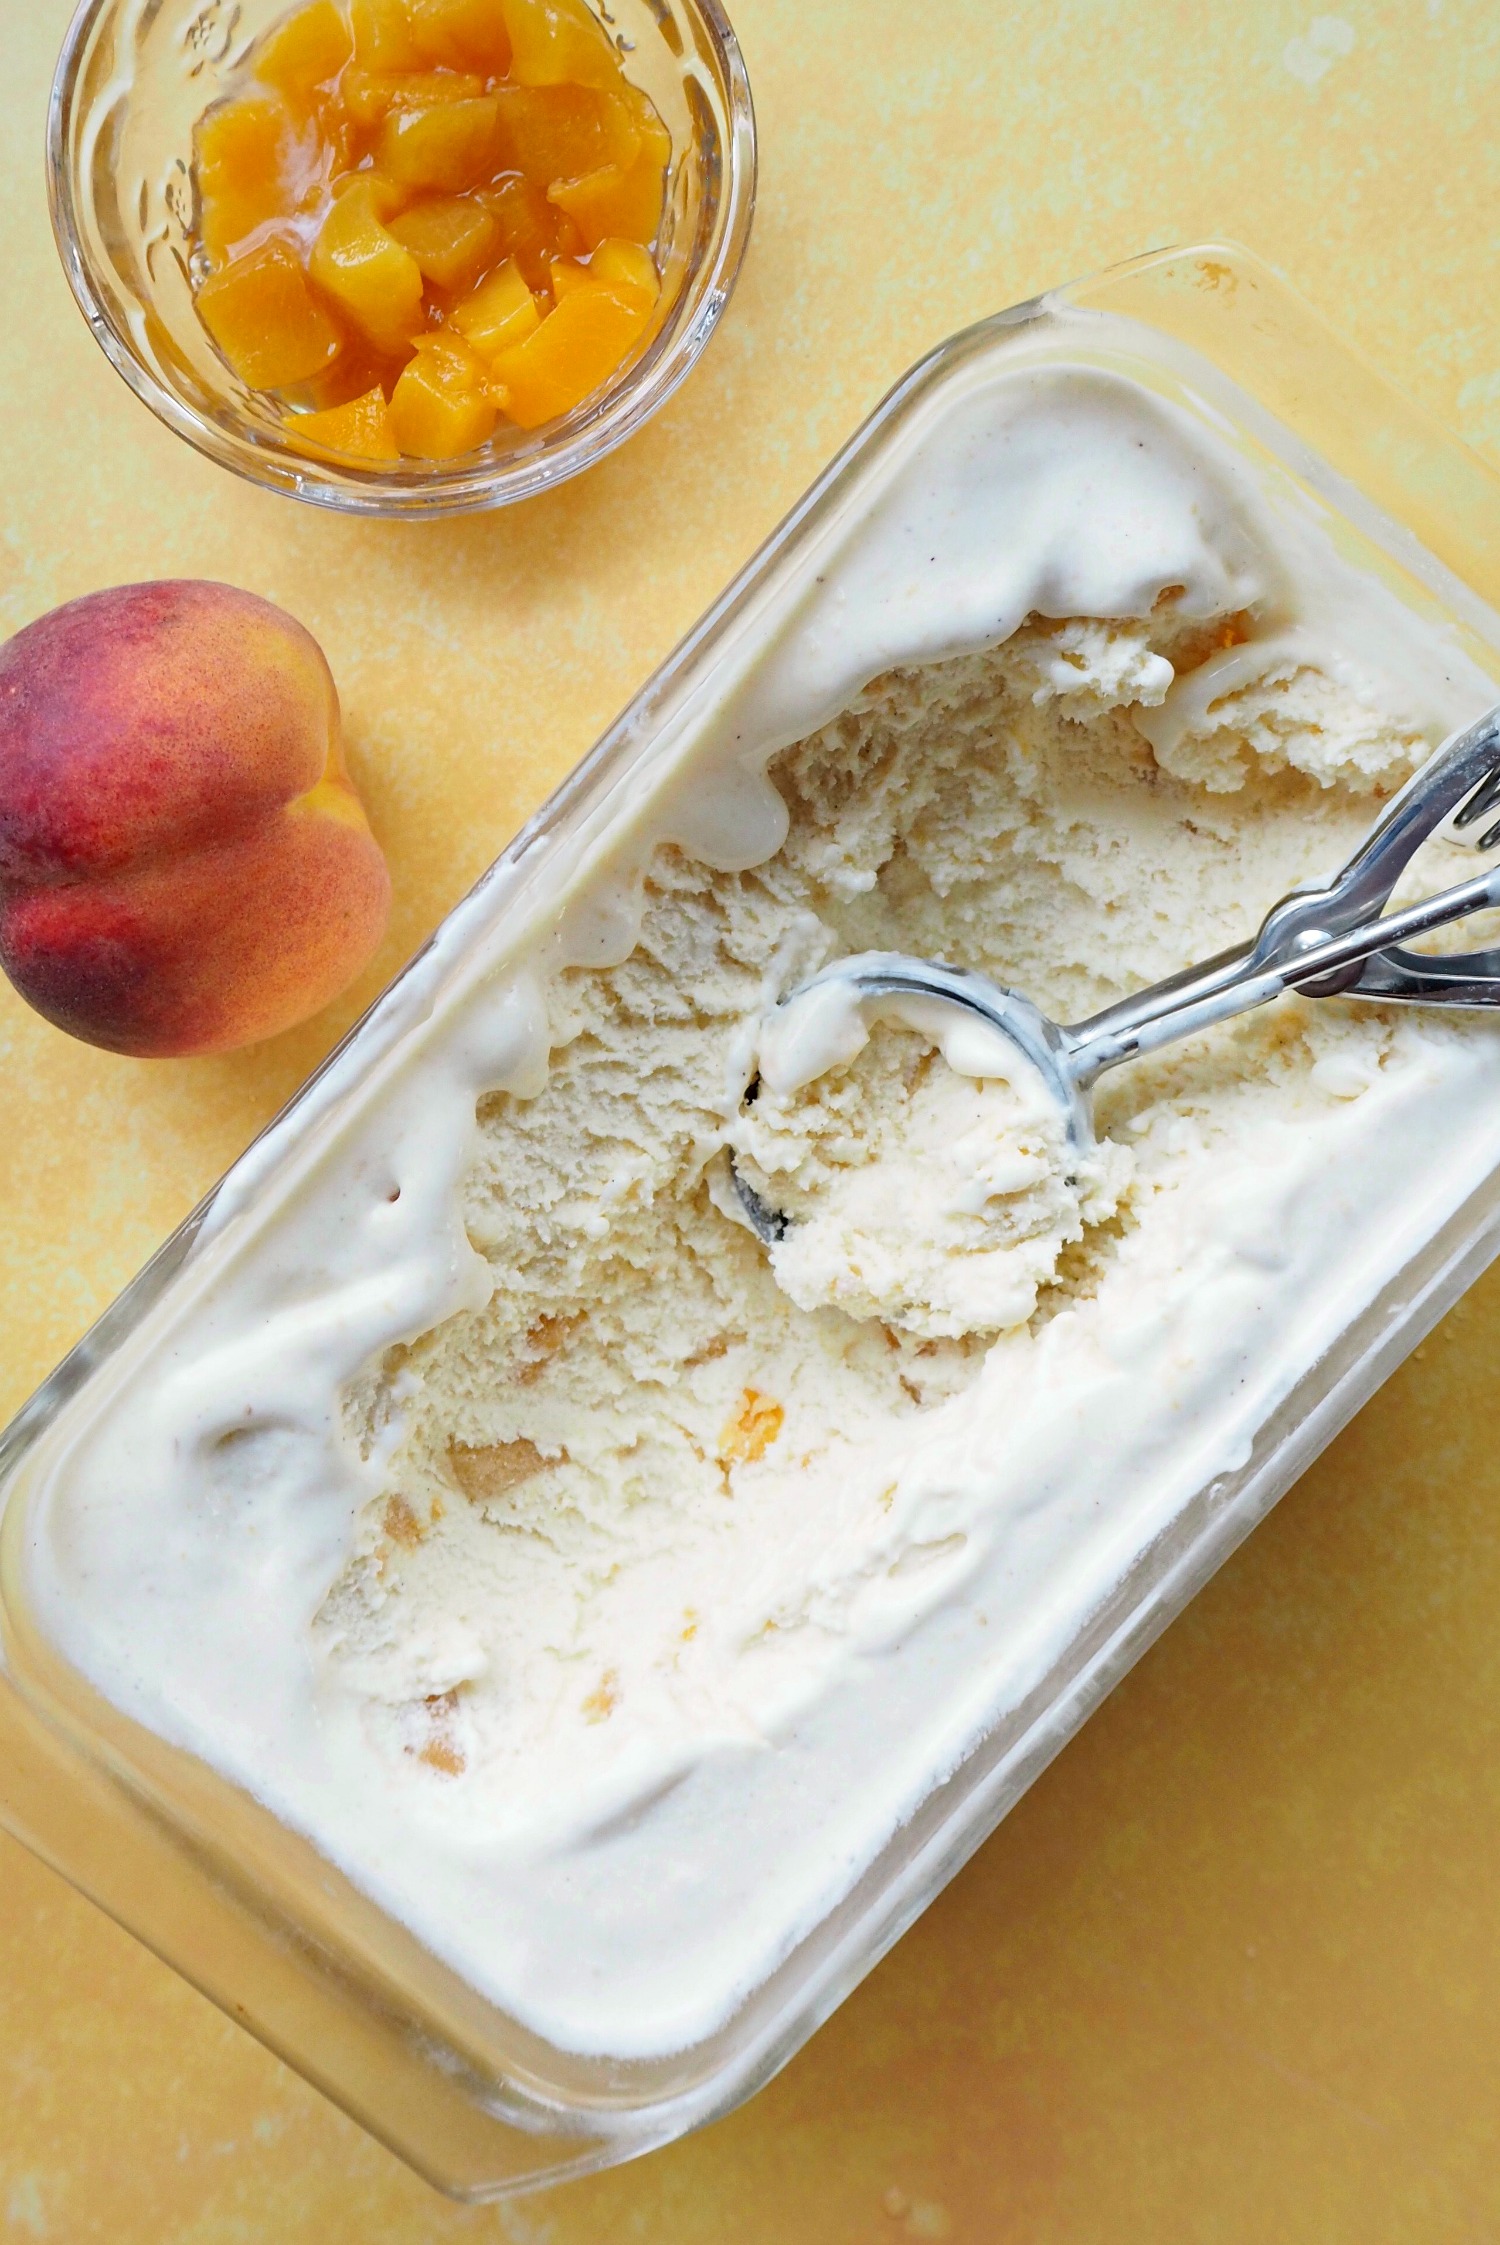 A tub of ice cream with an ice cream scoop in it, next to a dish of peach chunks and a whole peach.